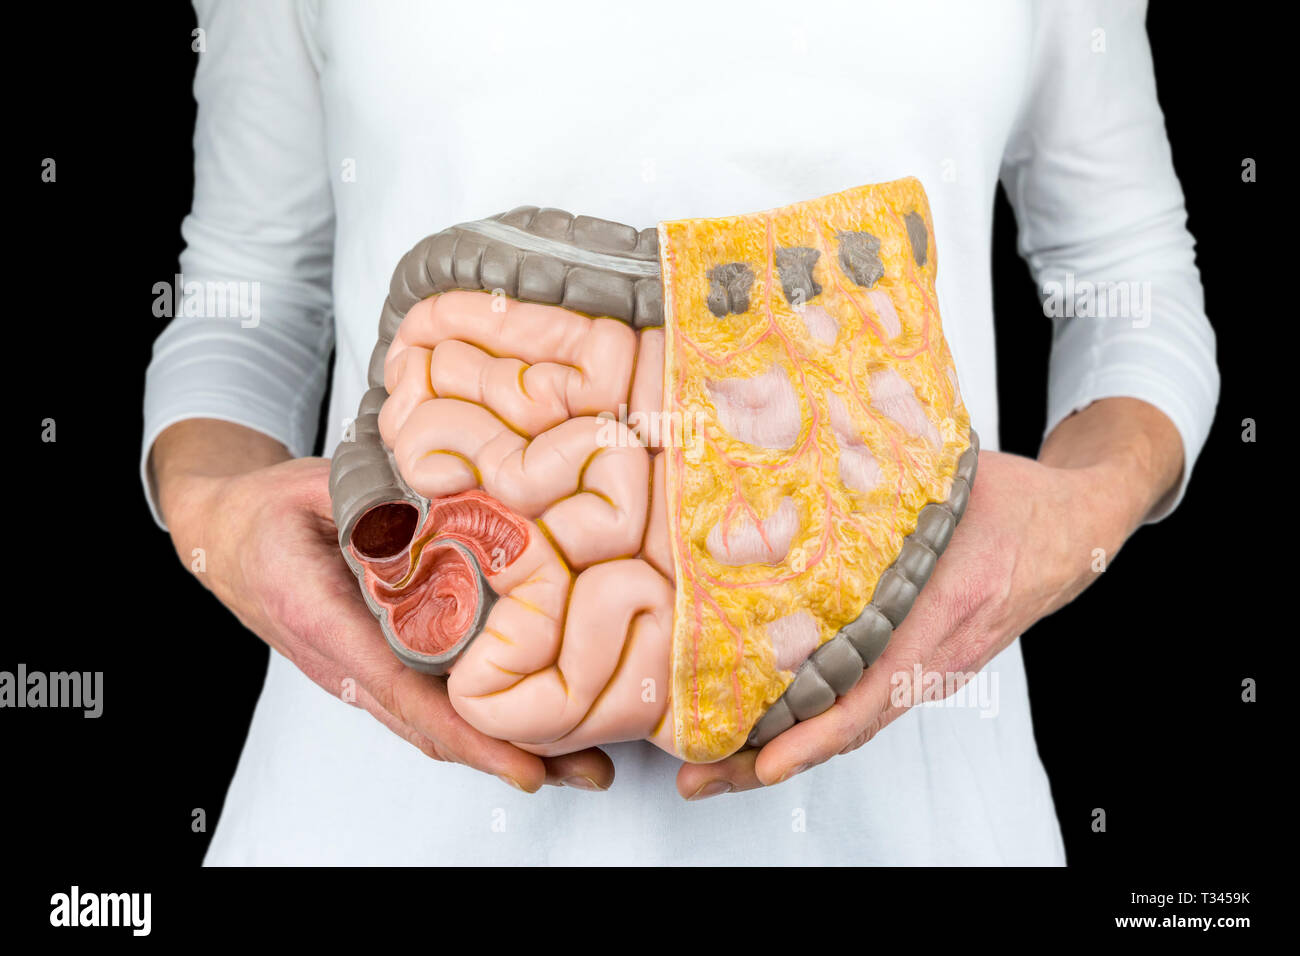 Female person holds human intestines model at body isolated on black background Stock Photo